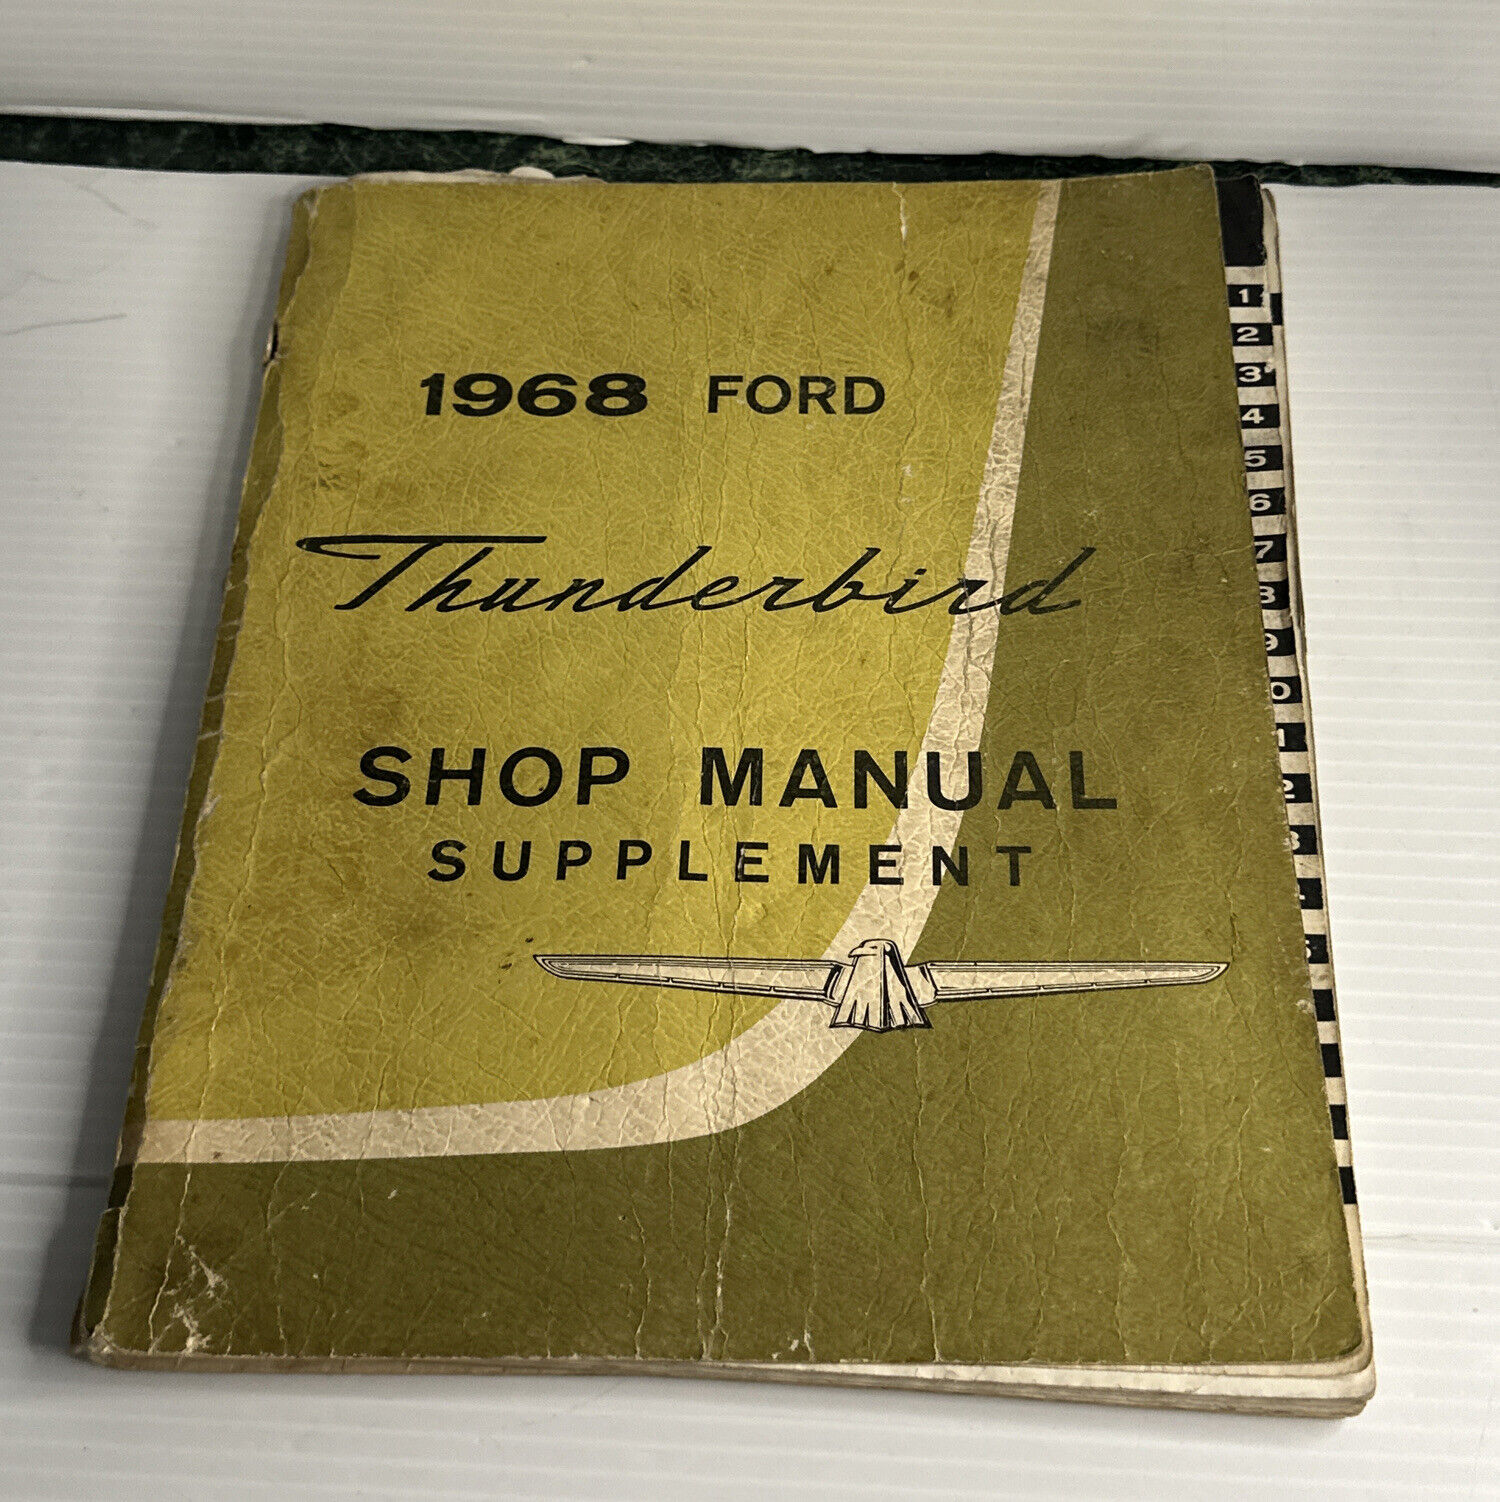 1968 Ford Thunderbird Shop Manual Supplement - Original AS IS